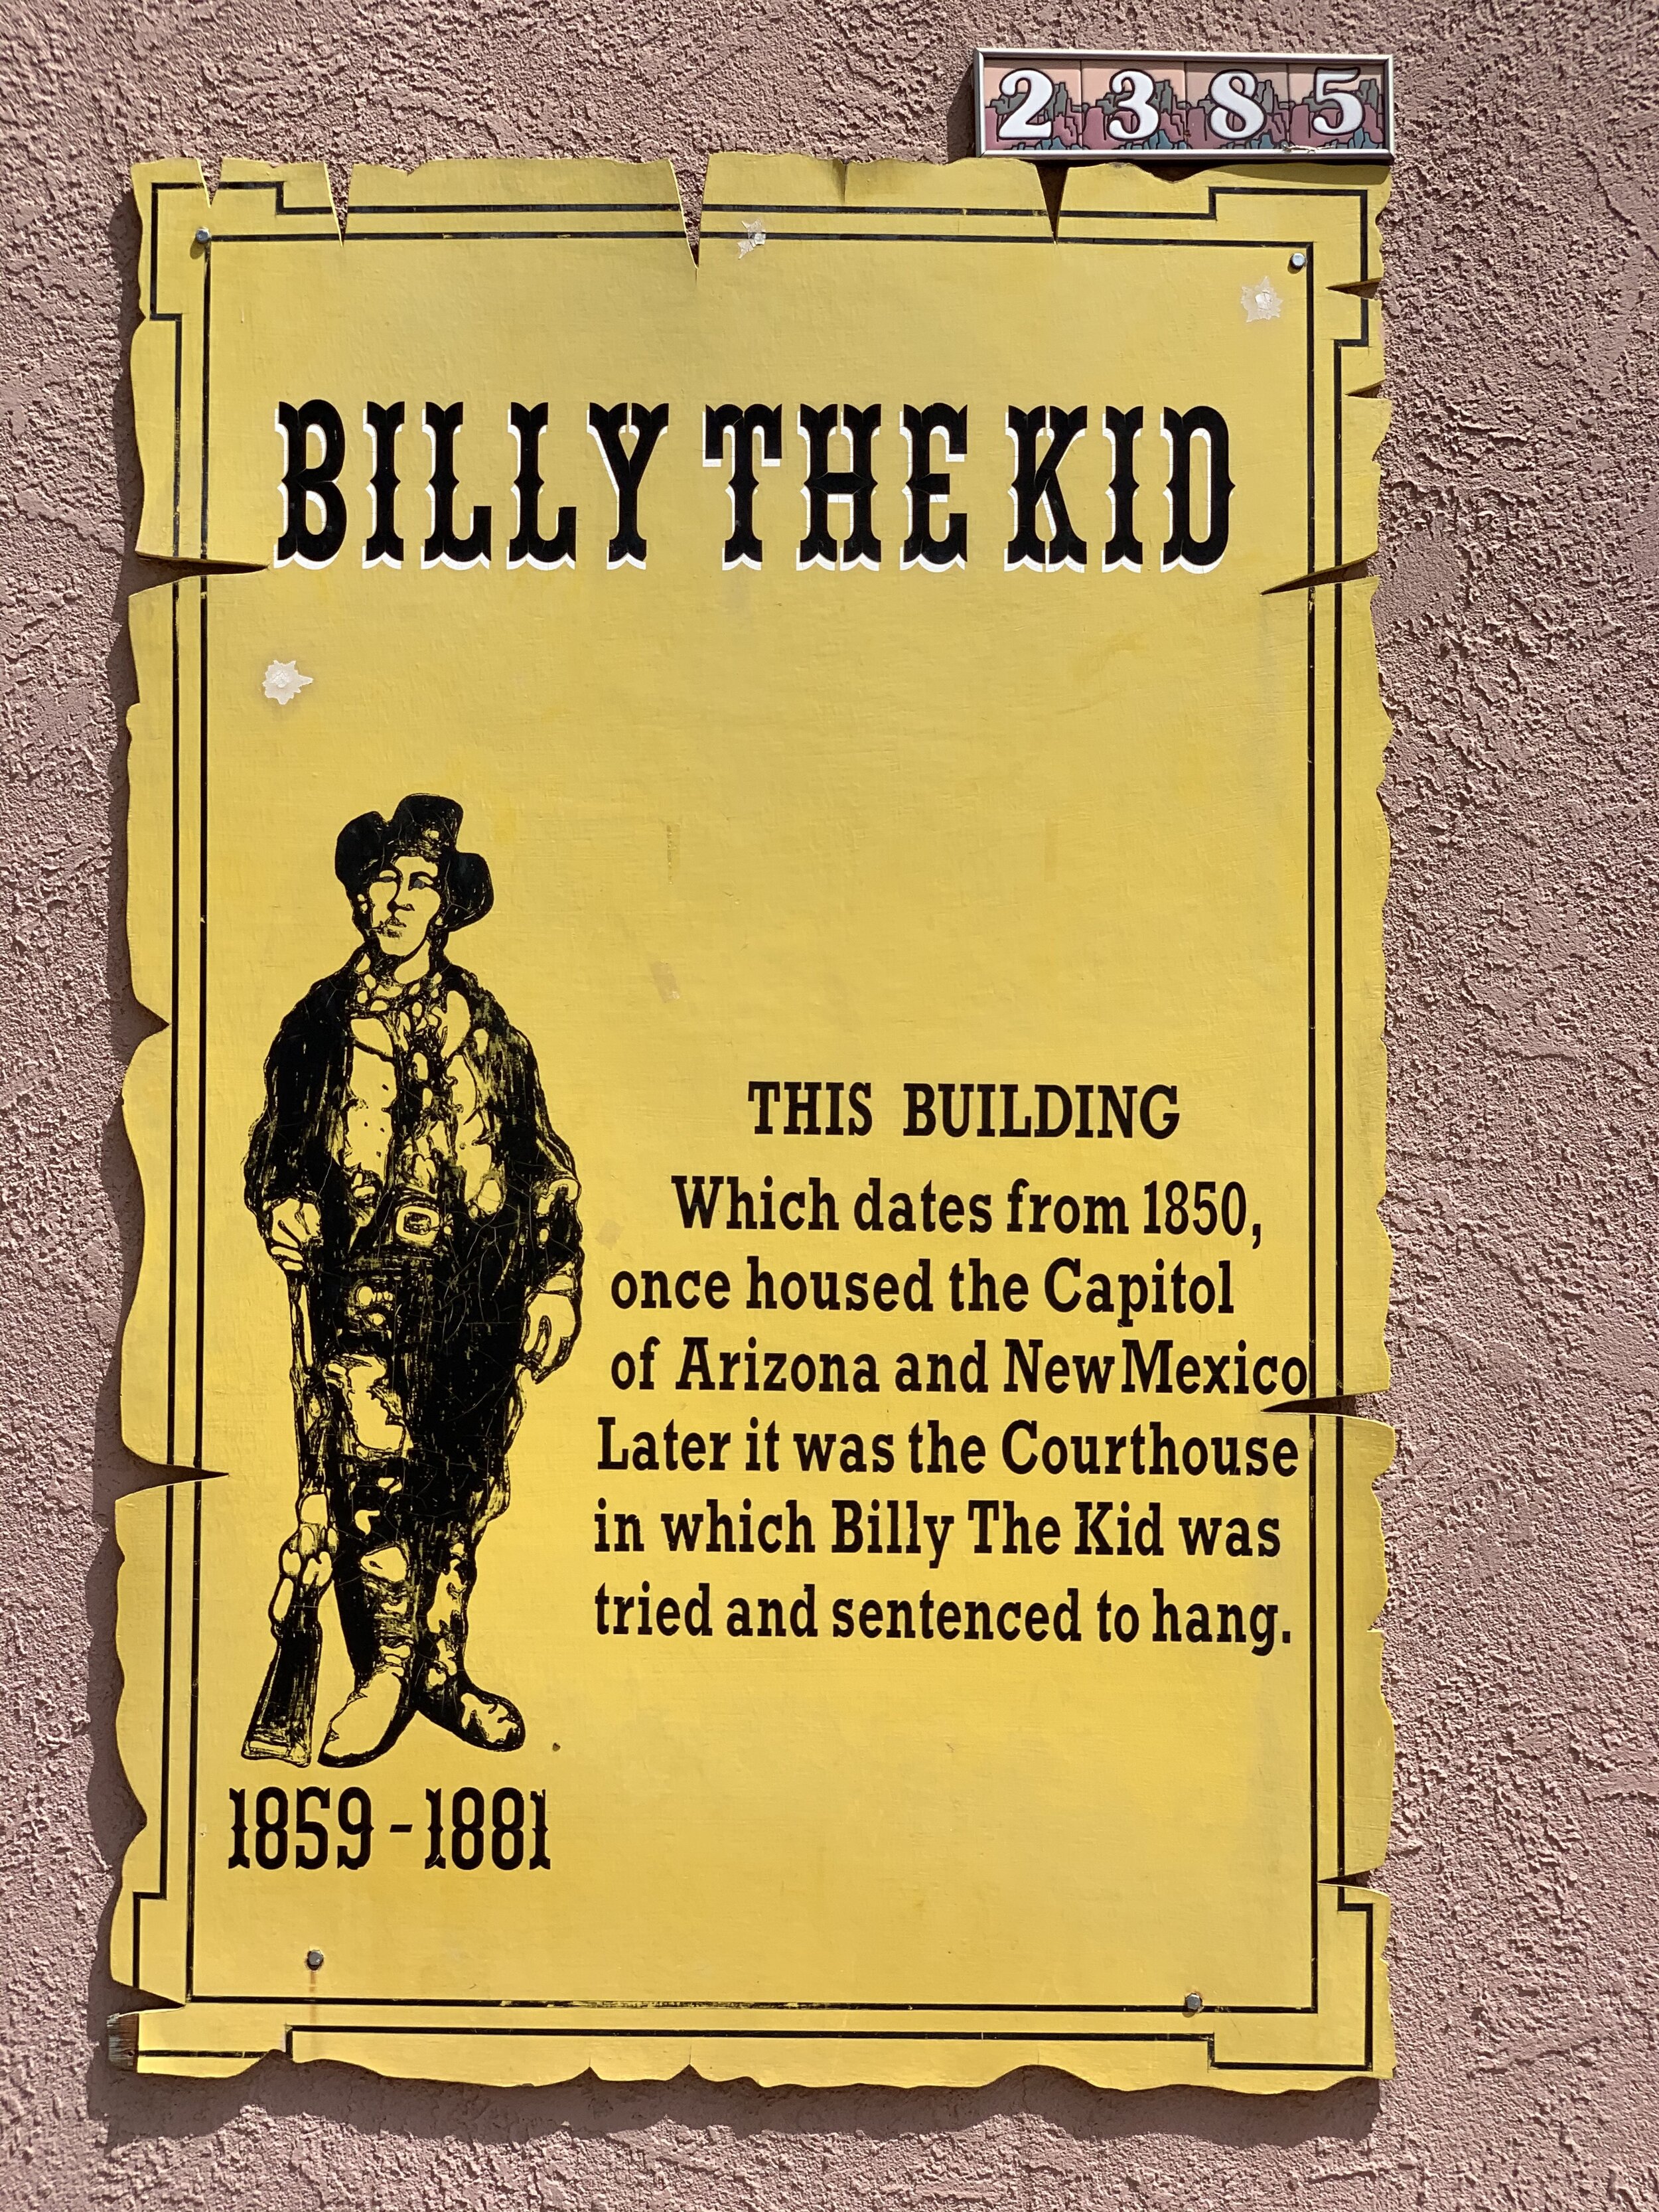  Billy the Kid killed eight men before he was shot and killed at age 21. 